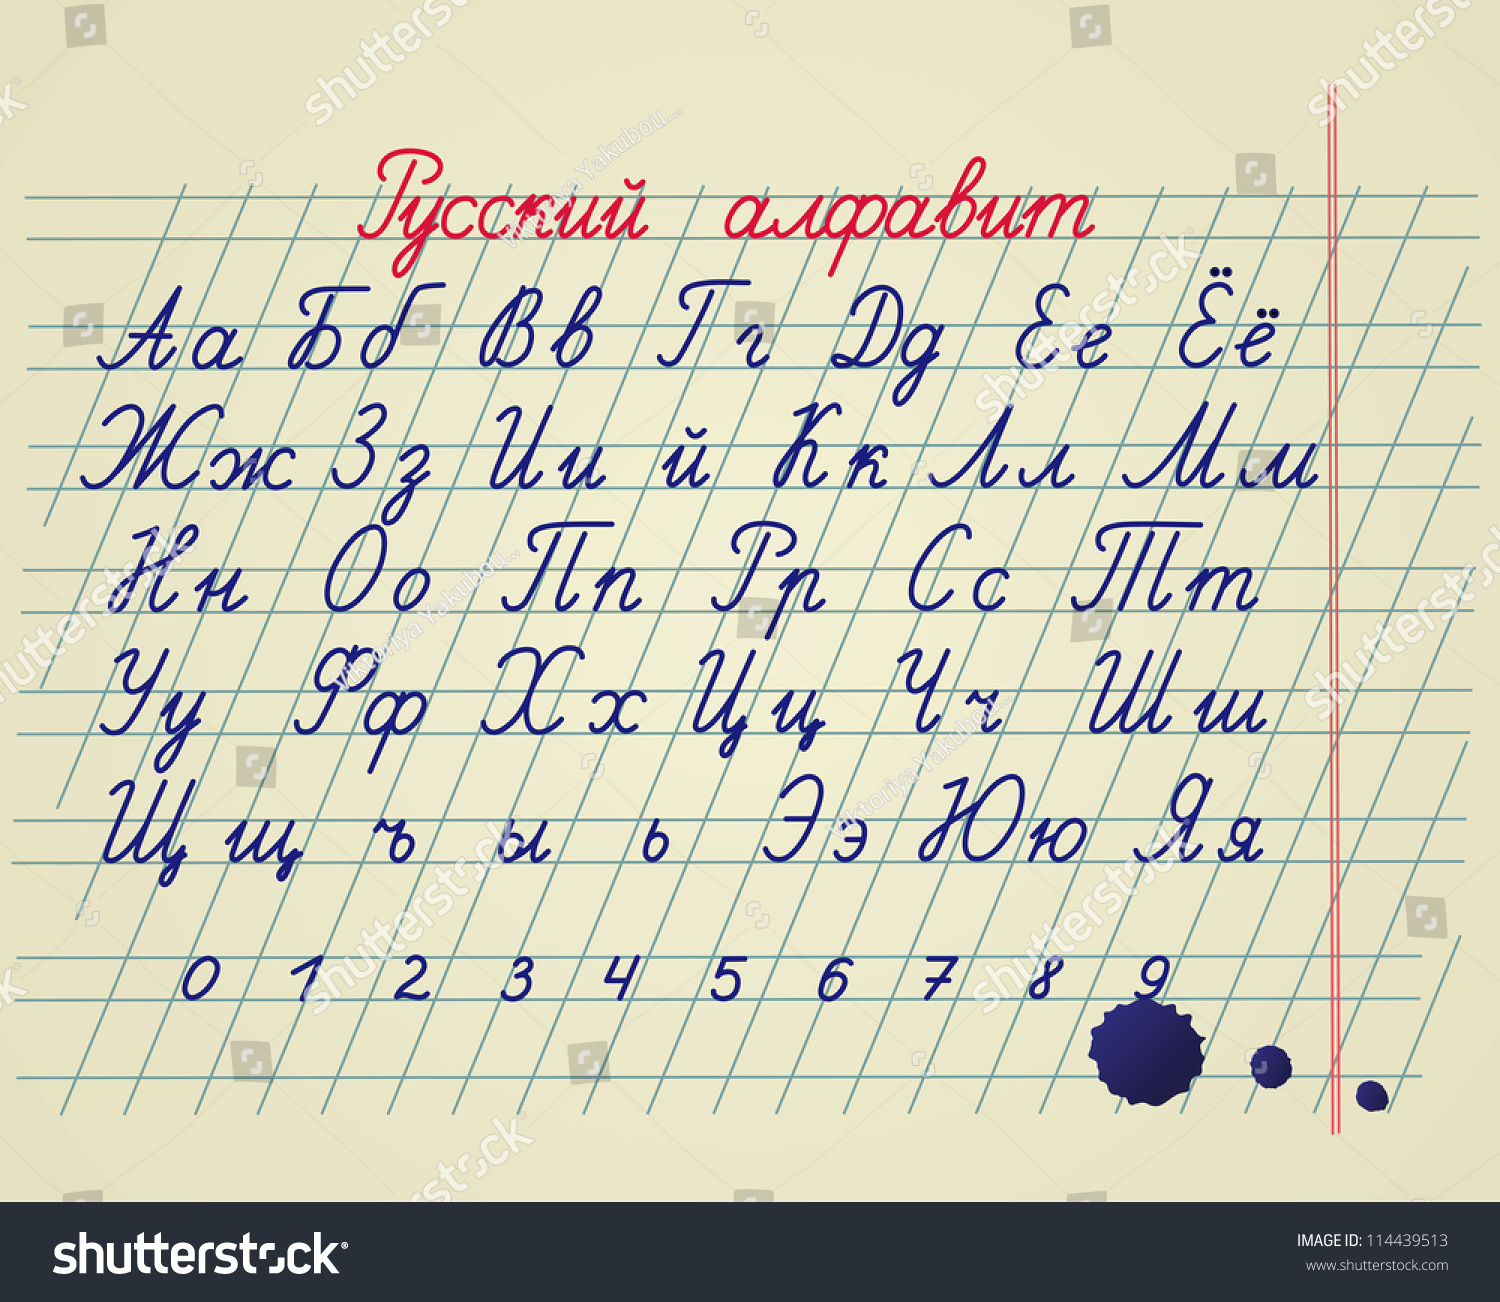 Russian Letters On The Screen 37